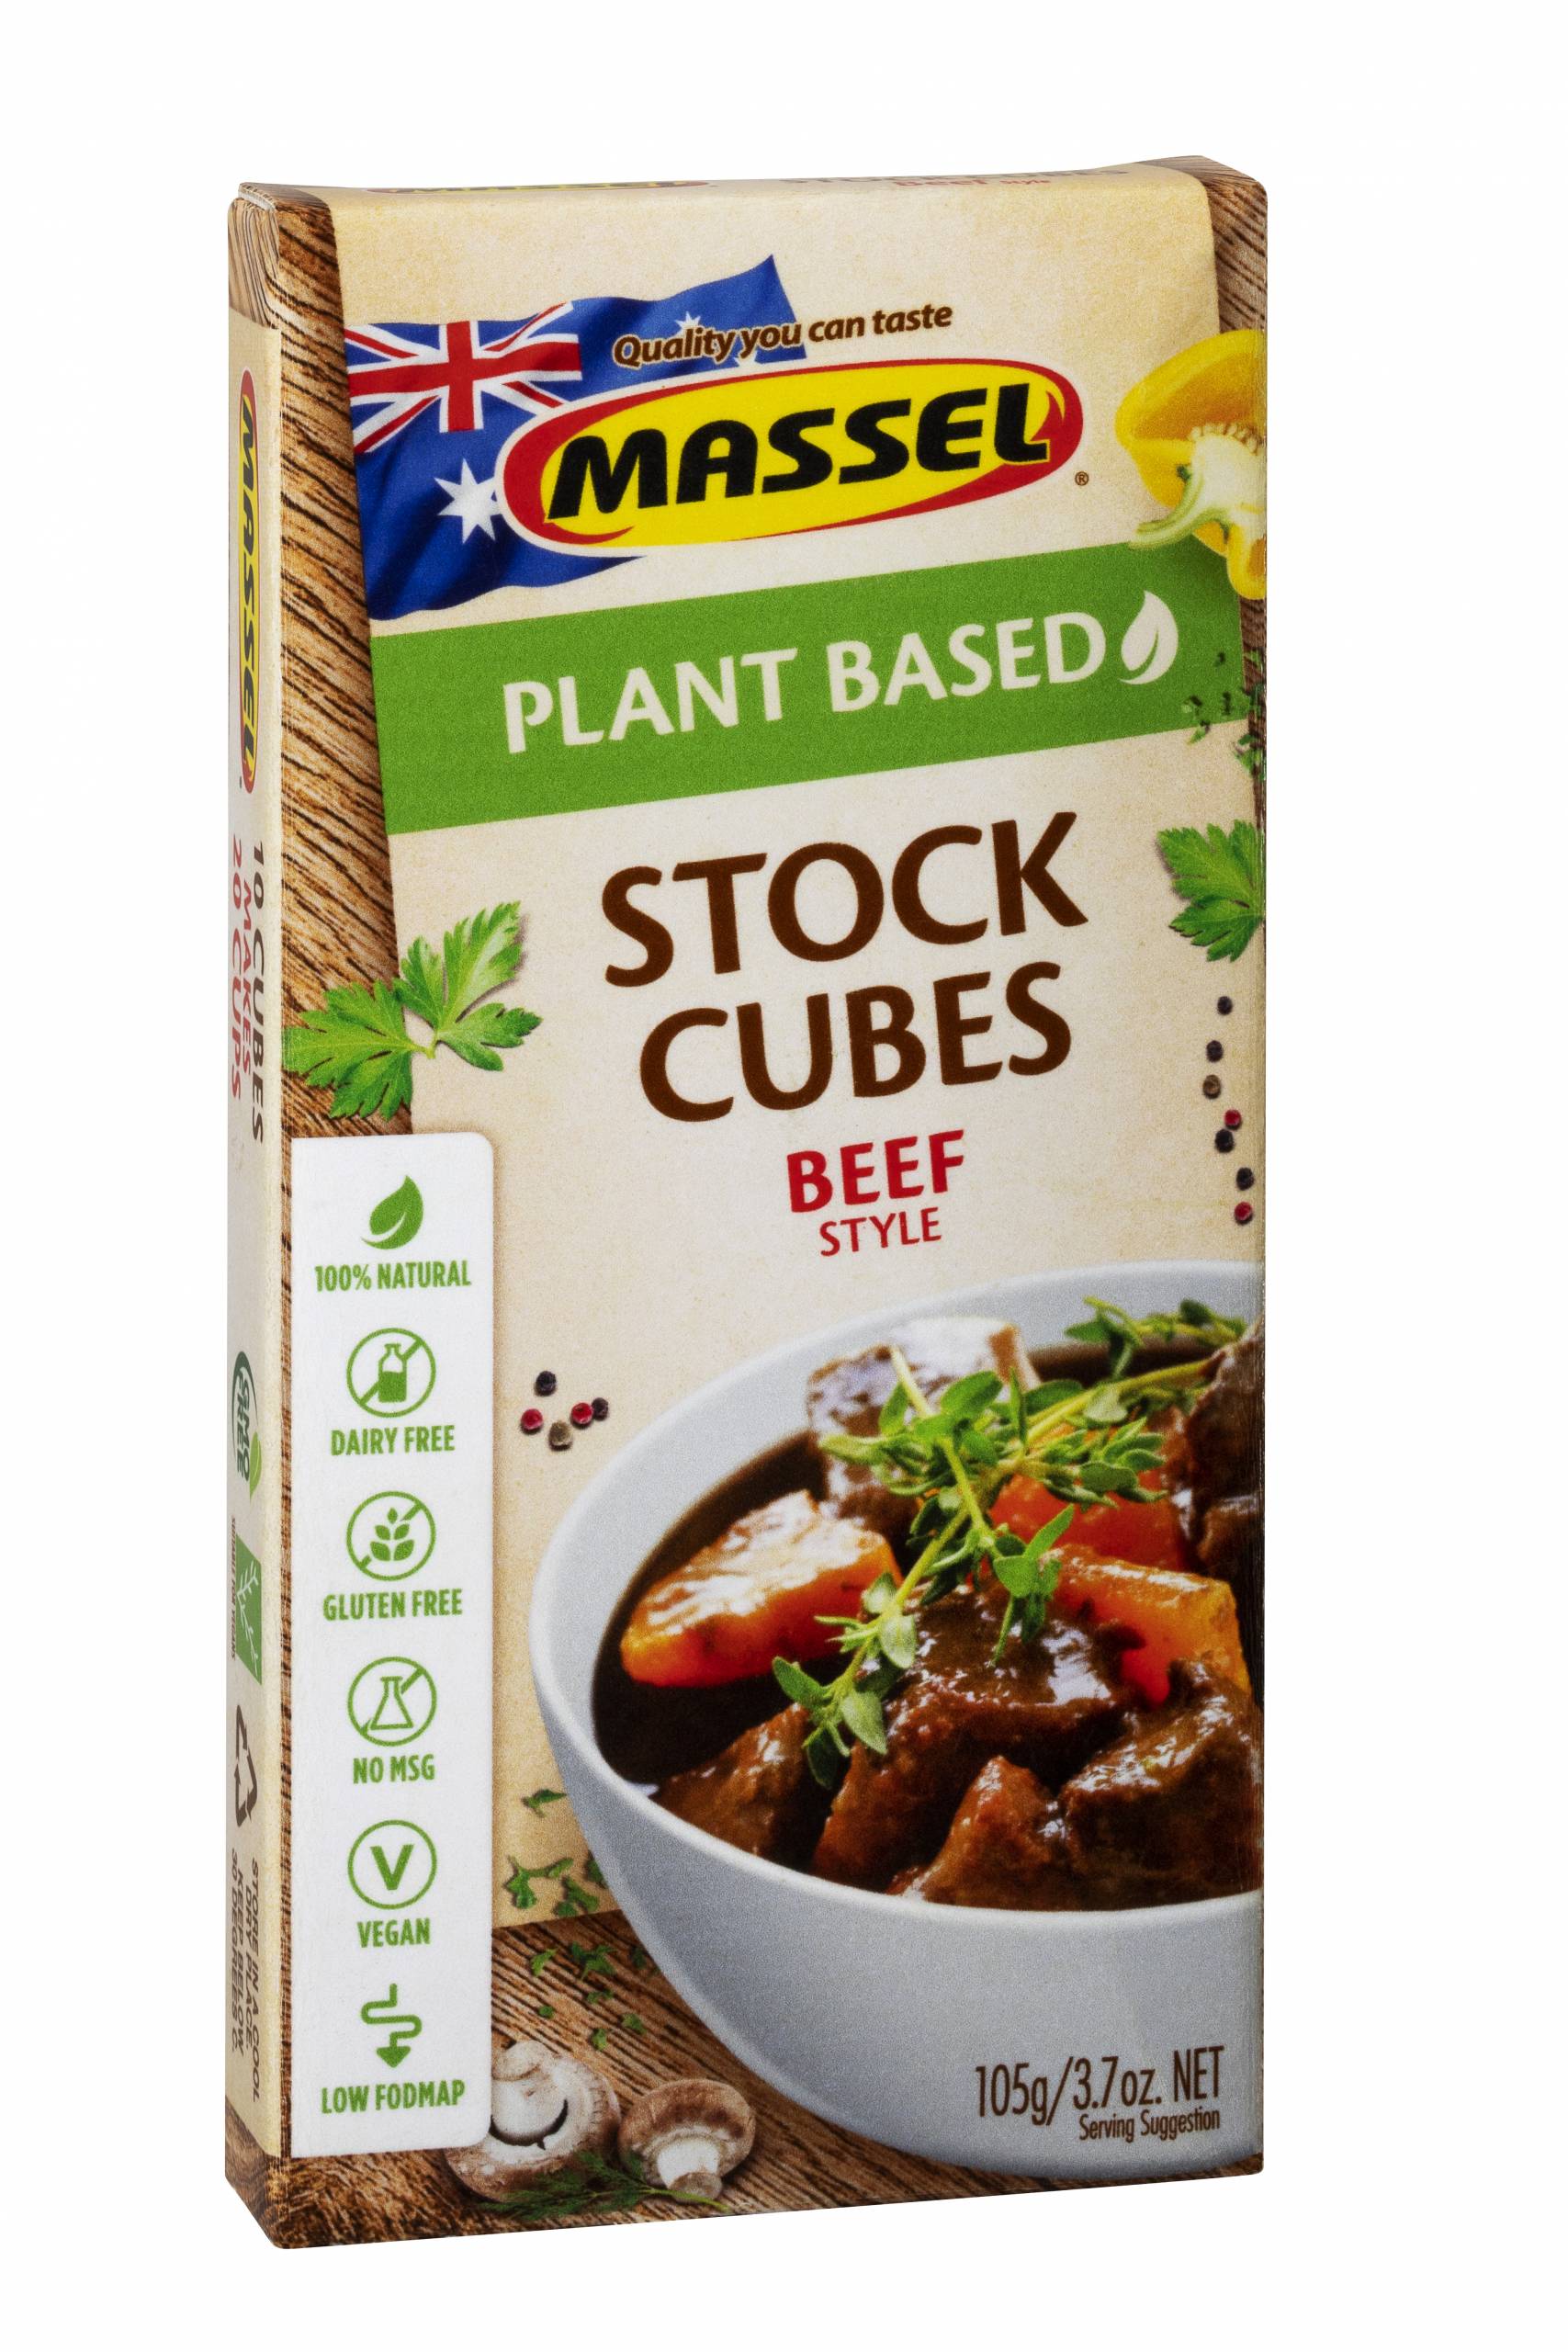 Massel Ultracubes Stock Cubes Beef Style 10pack Massel